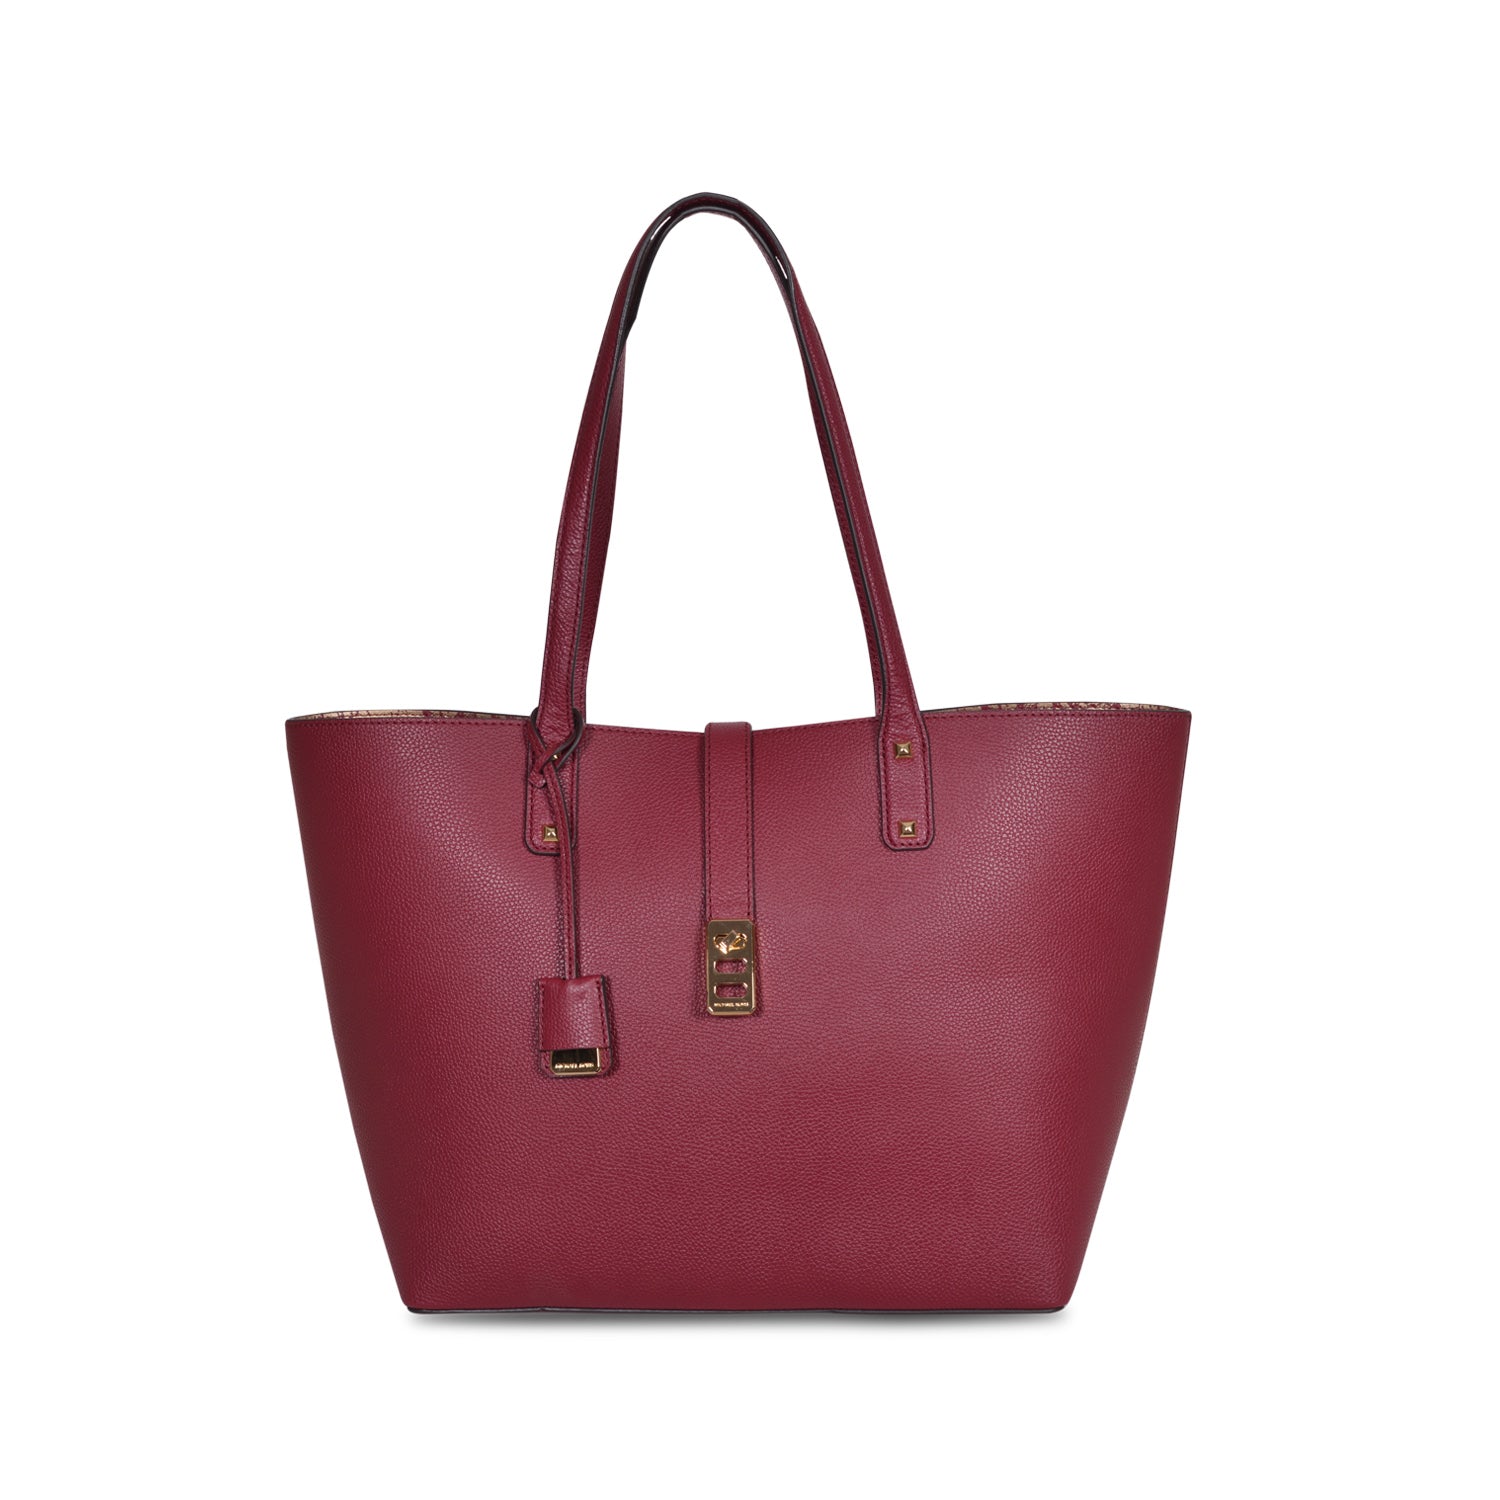 MICHAEL KORS KARSON LARGE MULBERRY LEATHER CARRY-ALL TOTE BAG ...